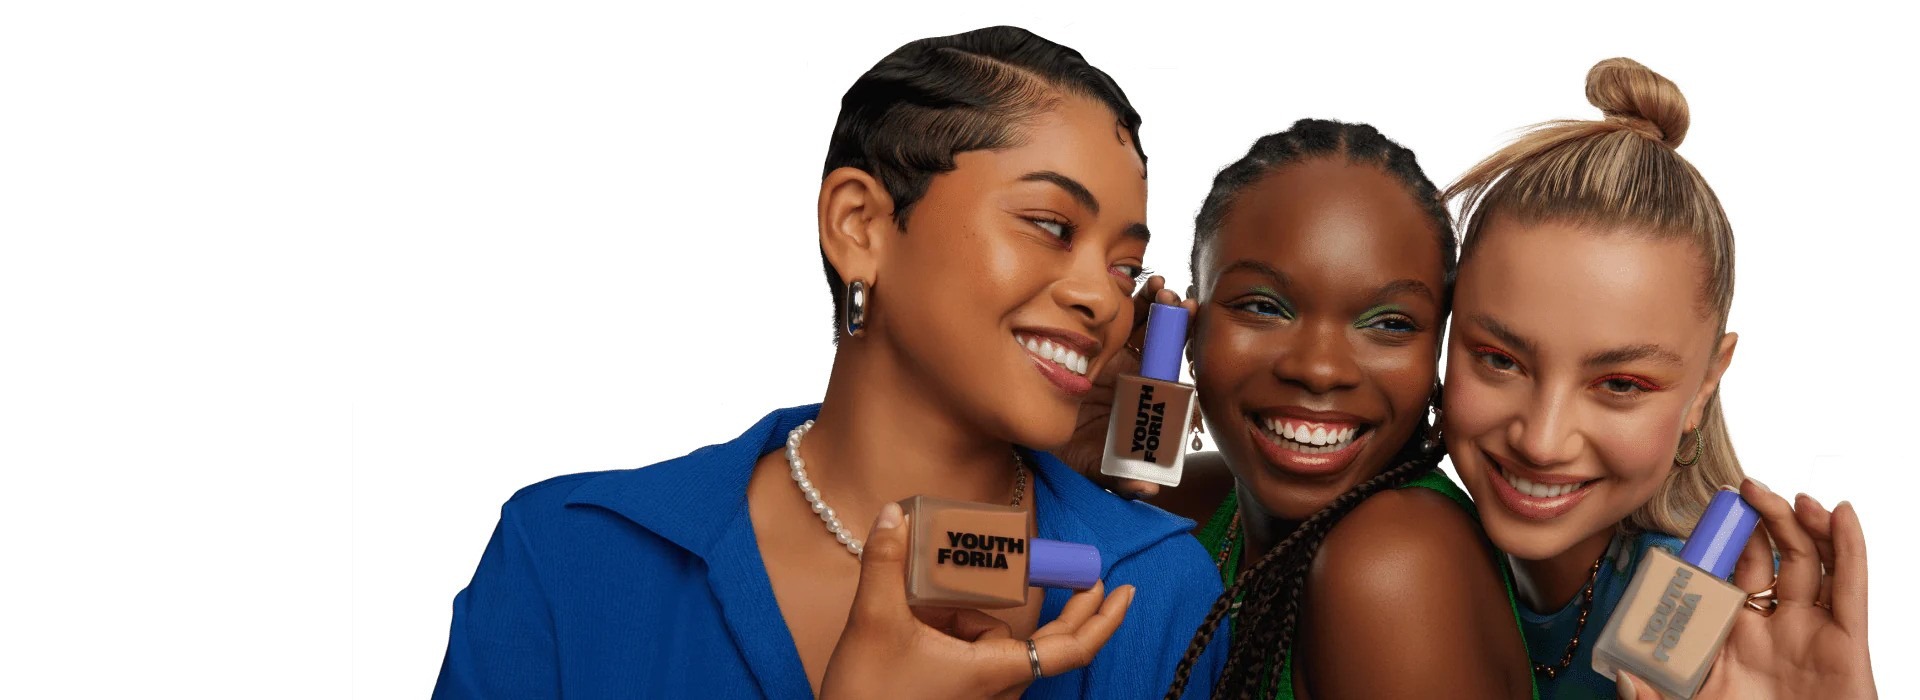 The Makeup Industry’s Persistent Failure to Serve Women of Color